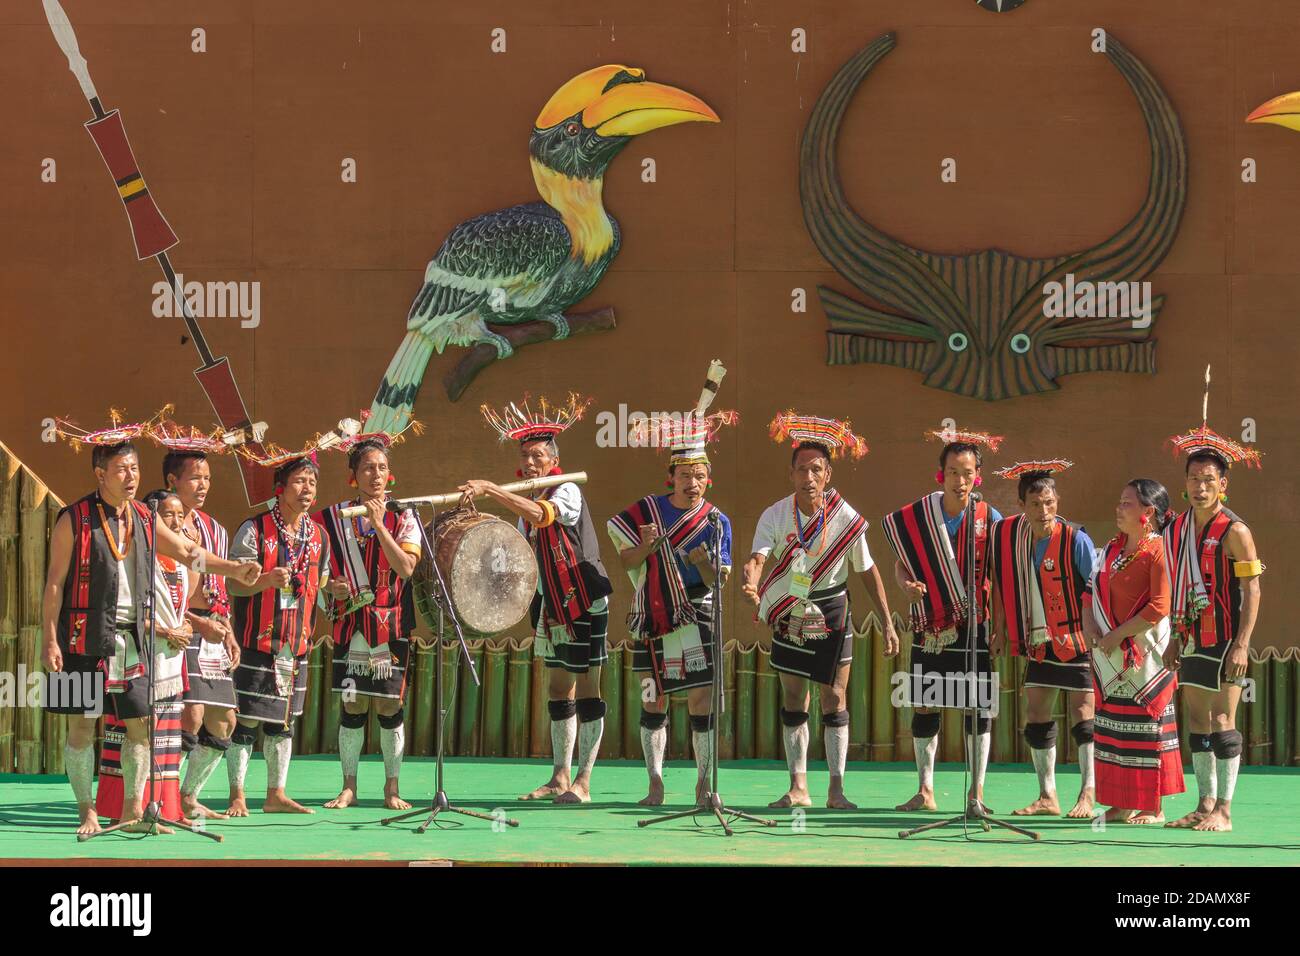 A Naga tribe playing their folk music and performing l folk dance on stage during Hornbill festival at Nagaland India on 4 December 2016 Stock Photo